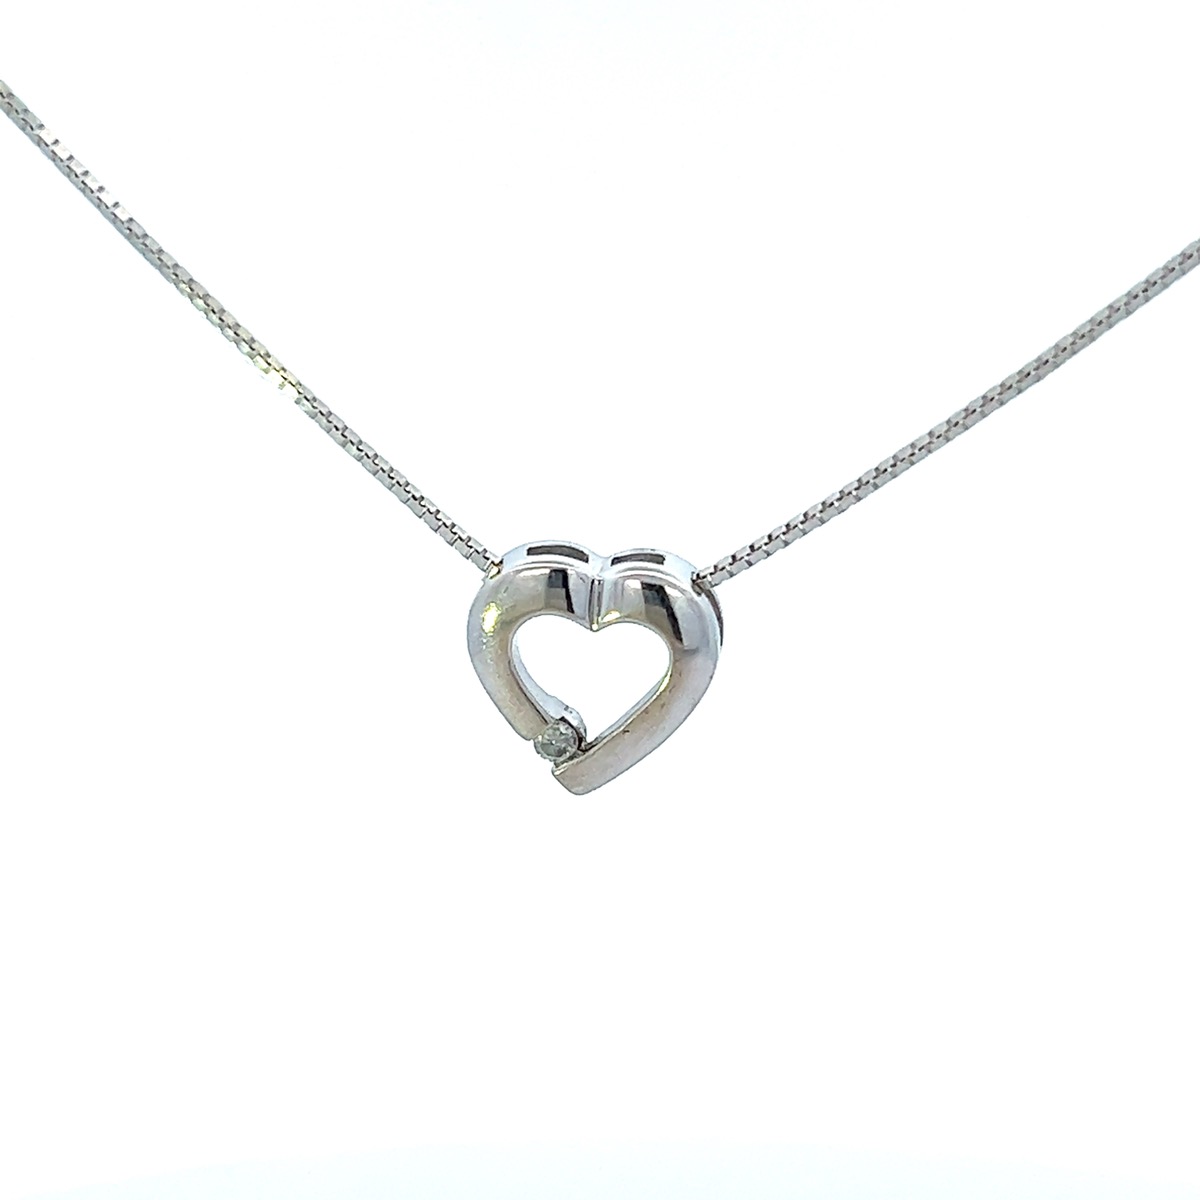 Tues Oct 25 – 10K Solid White Gold Heart Pendant with box chain – $199